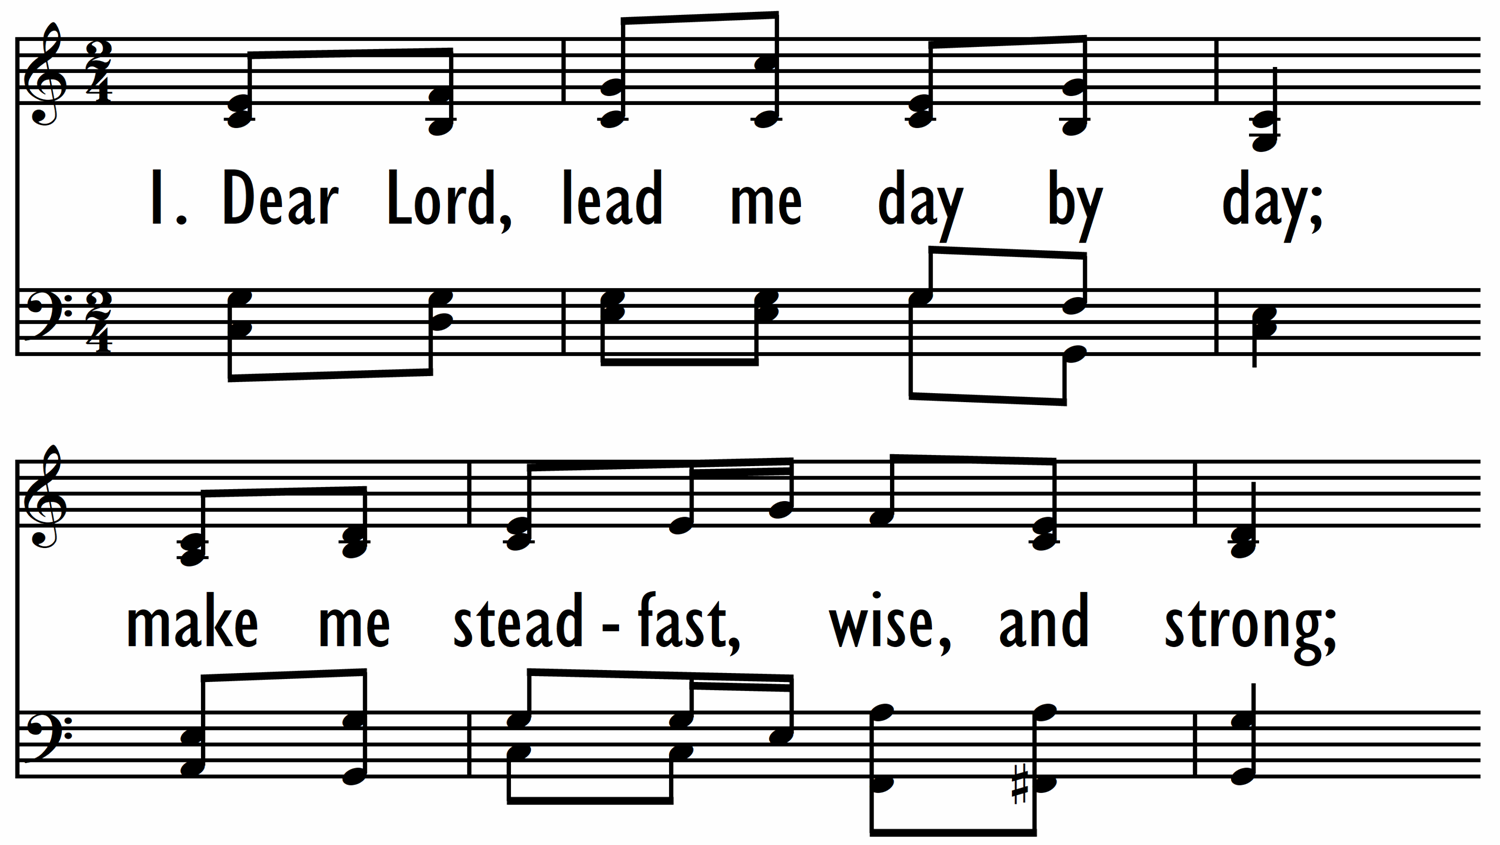 DEAR LORD, LEAD ME DAY BY DAY-ppt